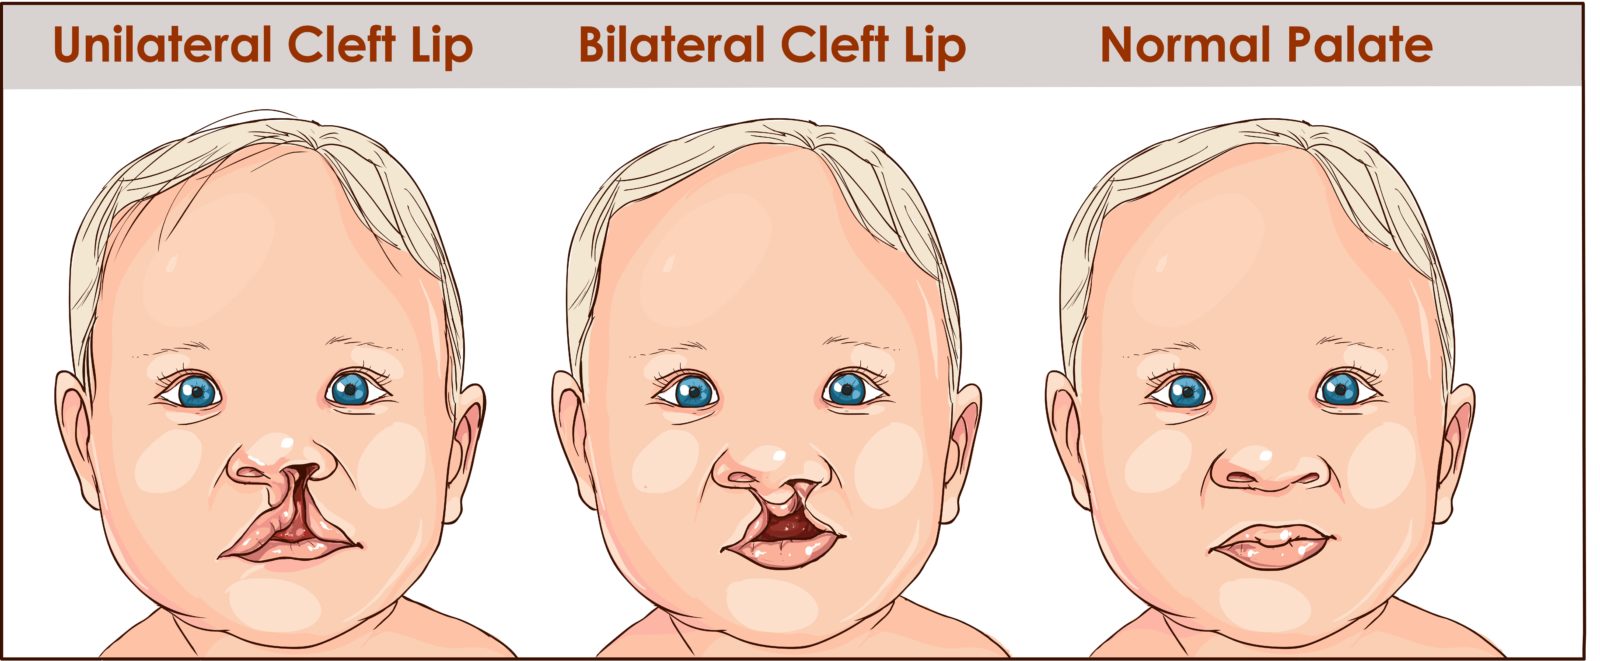 cleft left and palate